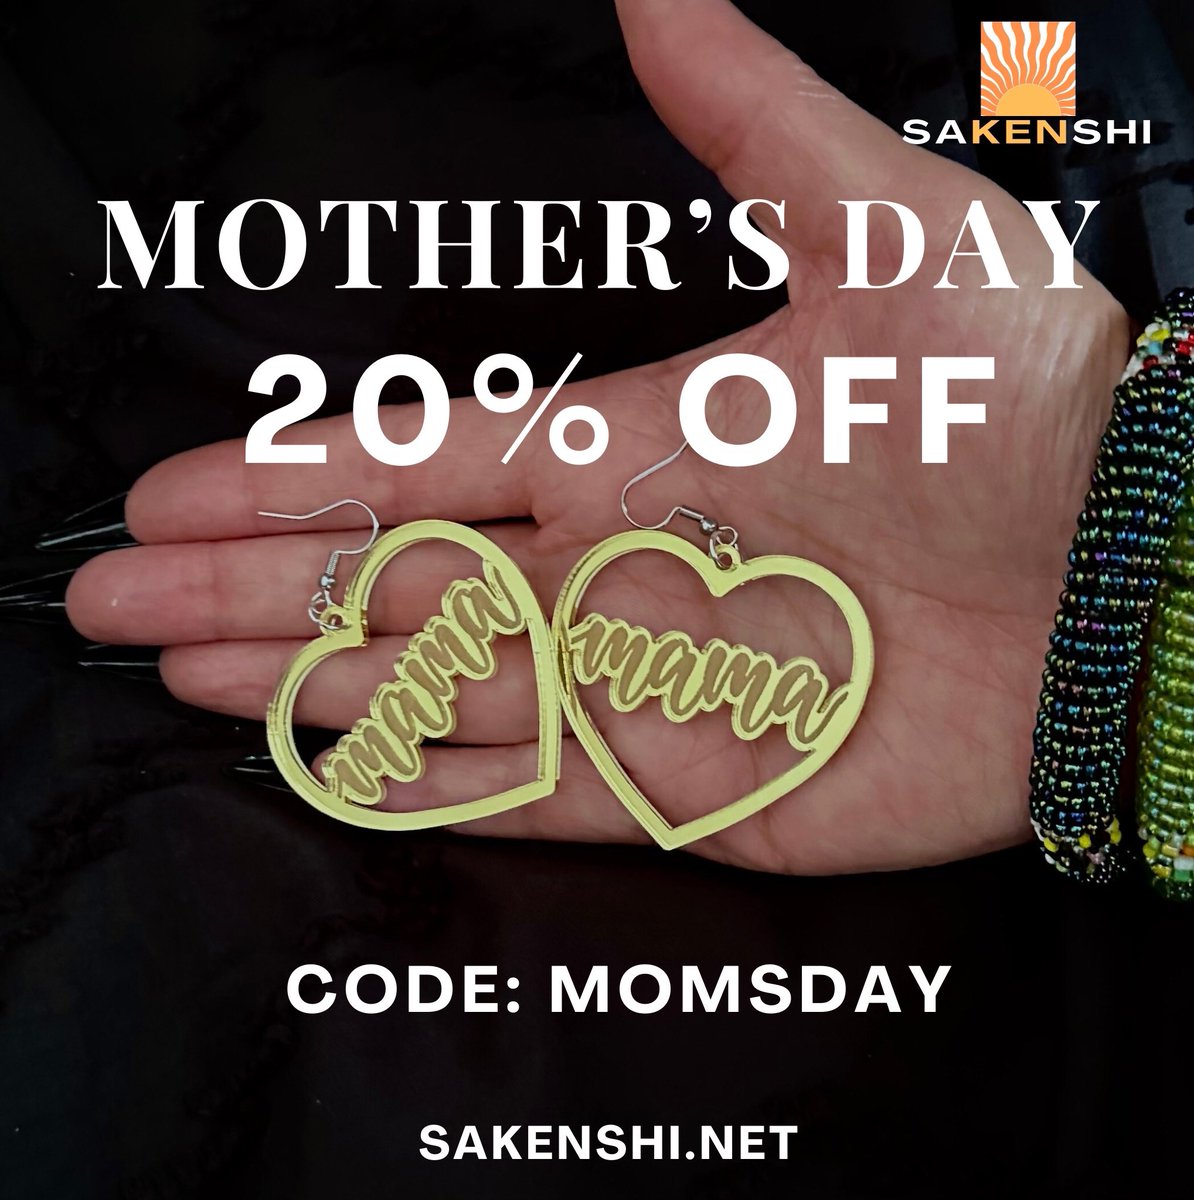 I’m having a Mother’s Day sale with brand new jewelry at my website sakenshi.net

Use code MOMSDAY to get 15% off of orders

#BlackOwned #buyblack #jewelry